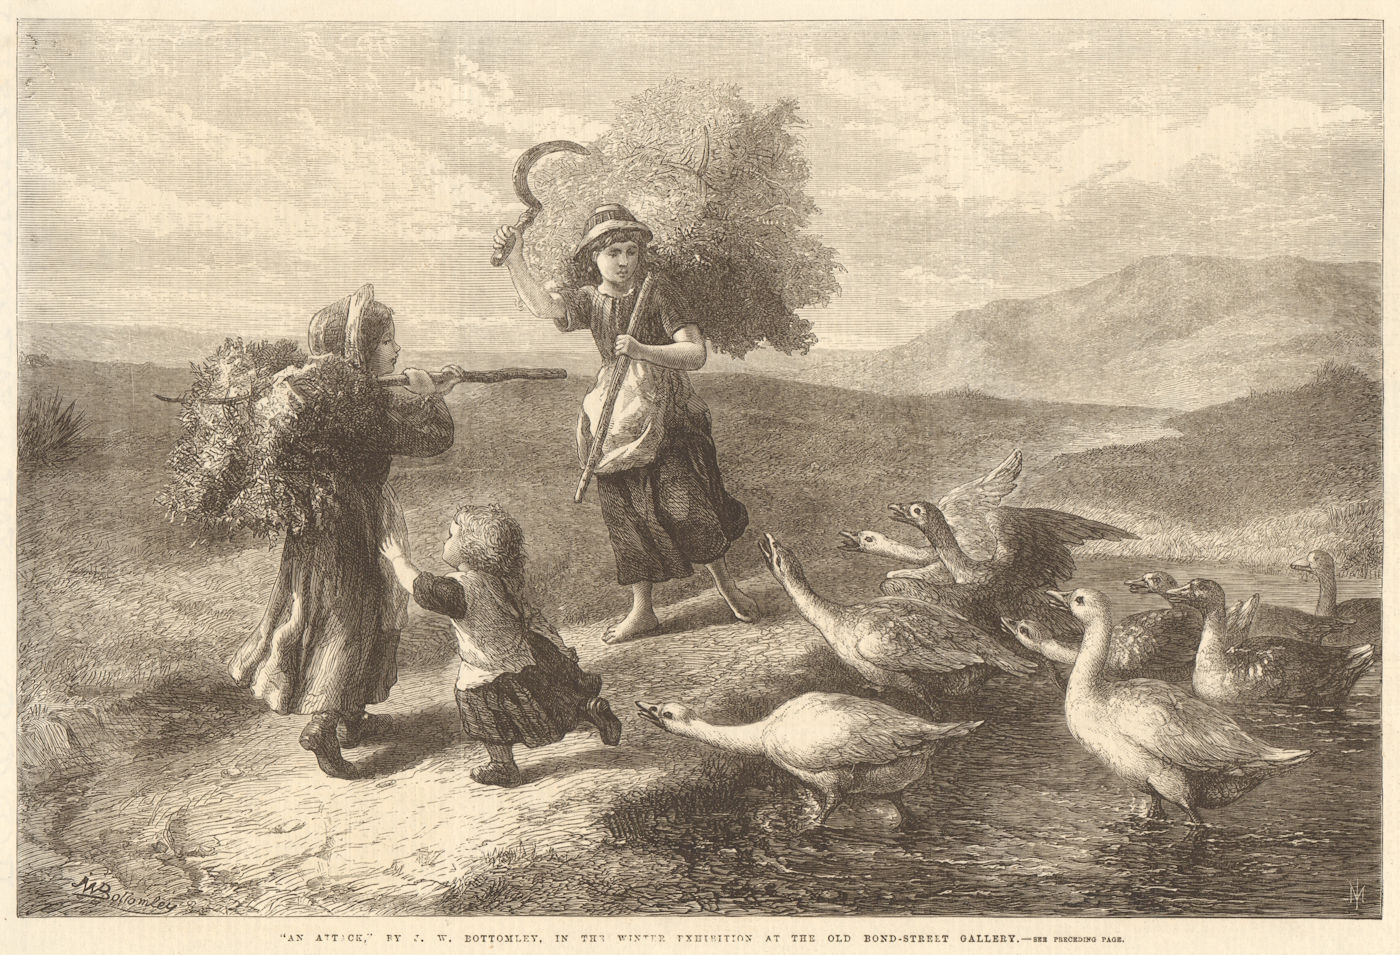 Associate Product "An attack", by J. W. Bottomley. Children. Farming Geese 1869 antique ILN page